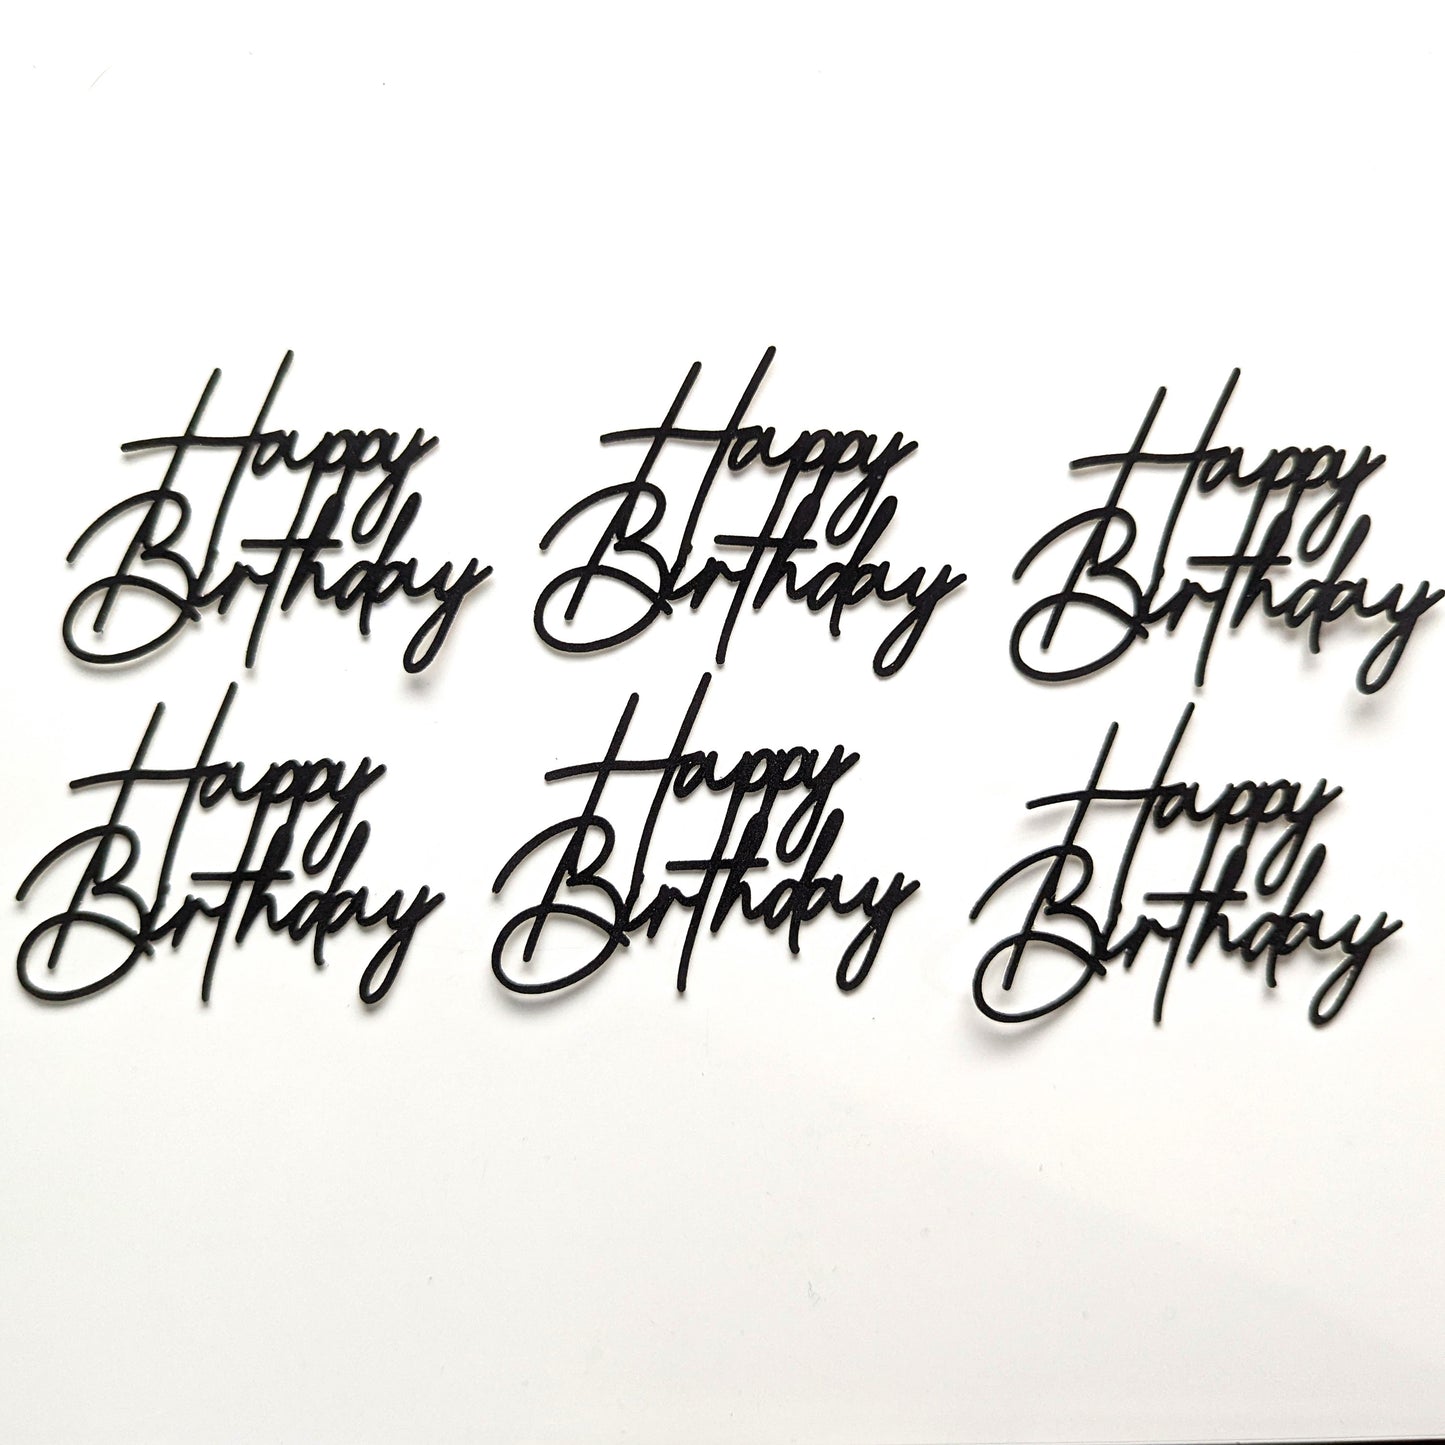 12 Pack Happy Birthday Cupcake Toppers Stylish Gold, Silver, Black Free Delivery